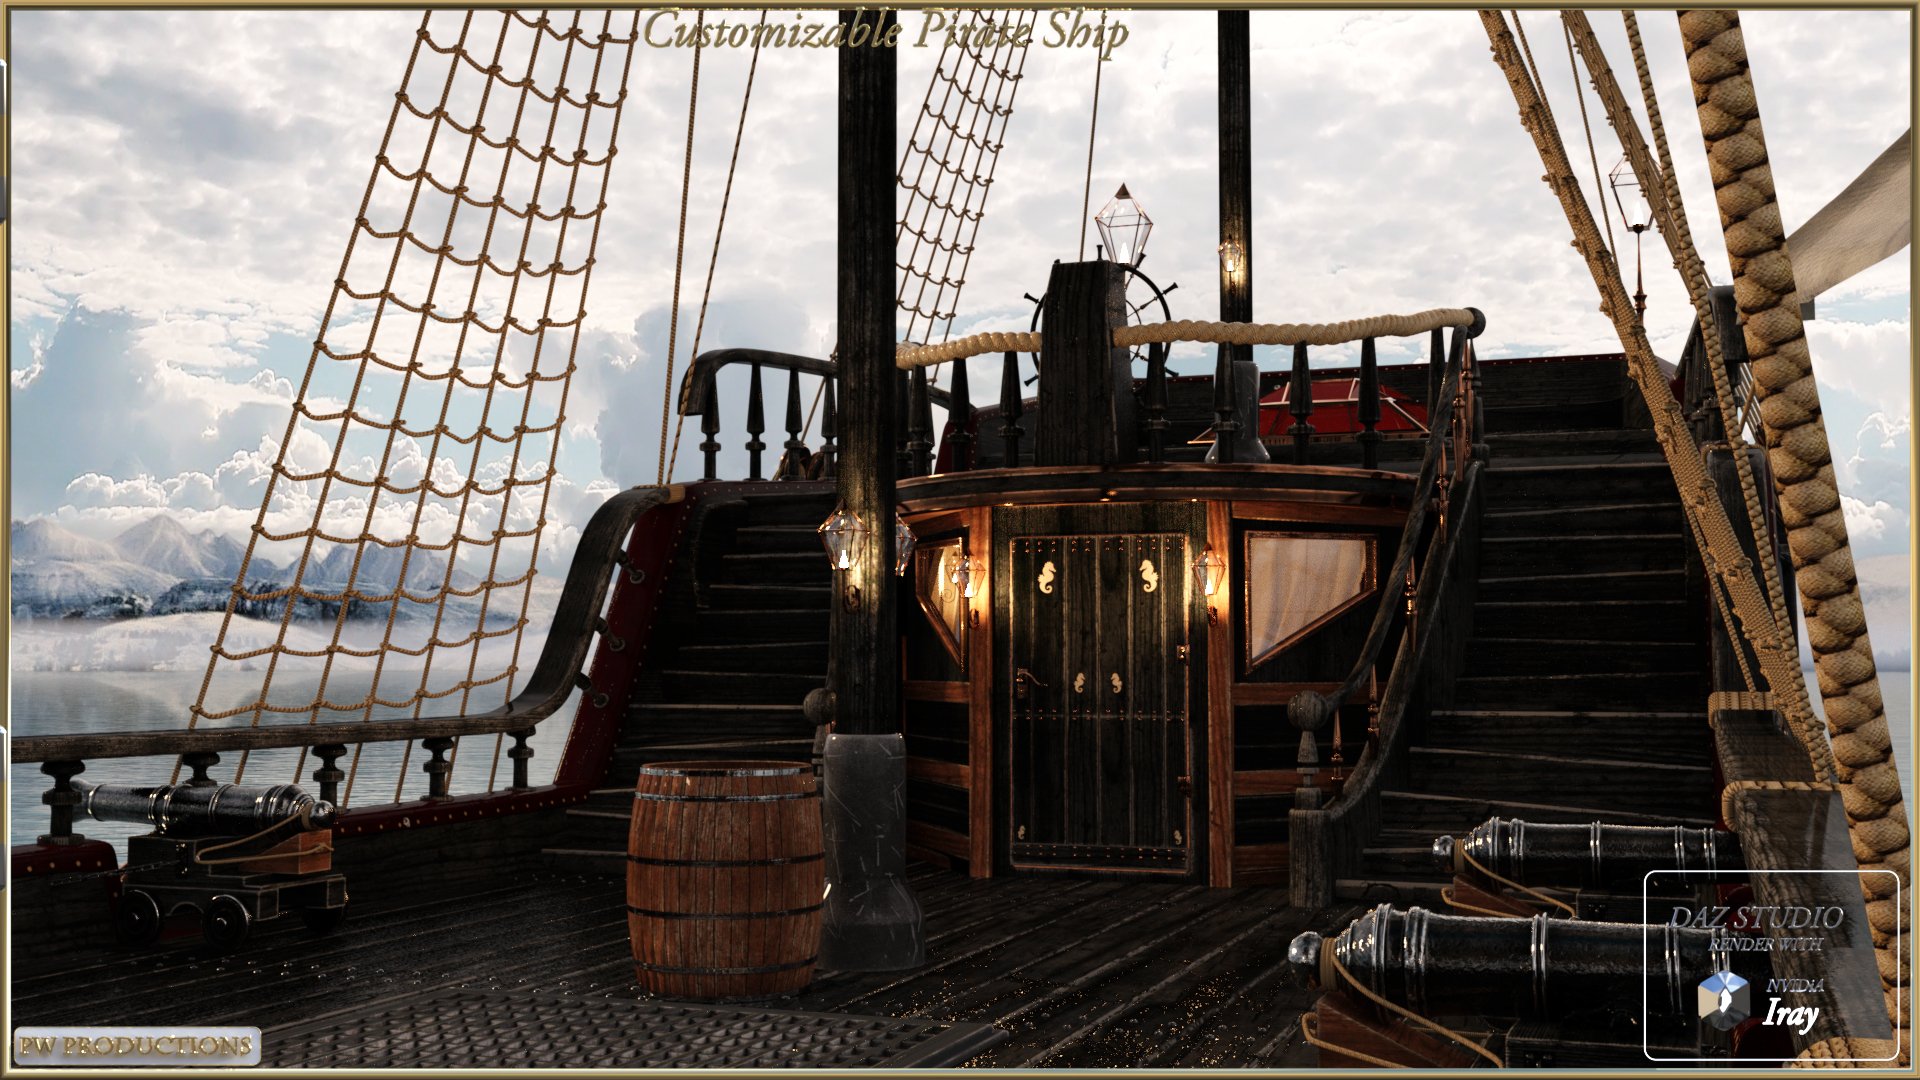 PW Customizable Pirate Ship by: PW Productions, 3D Models by Daz 3D